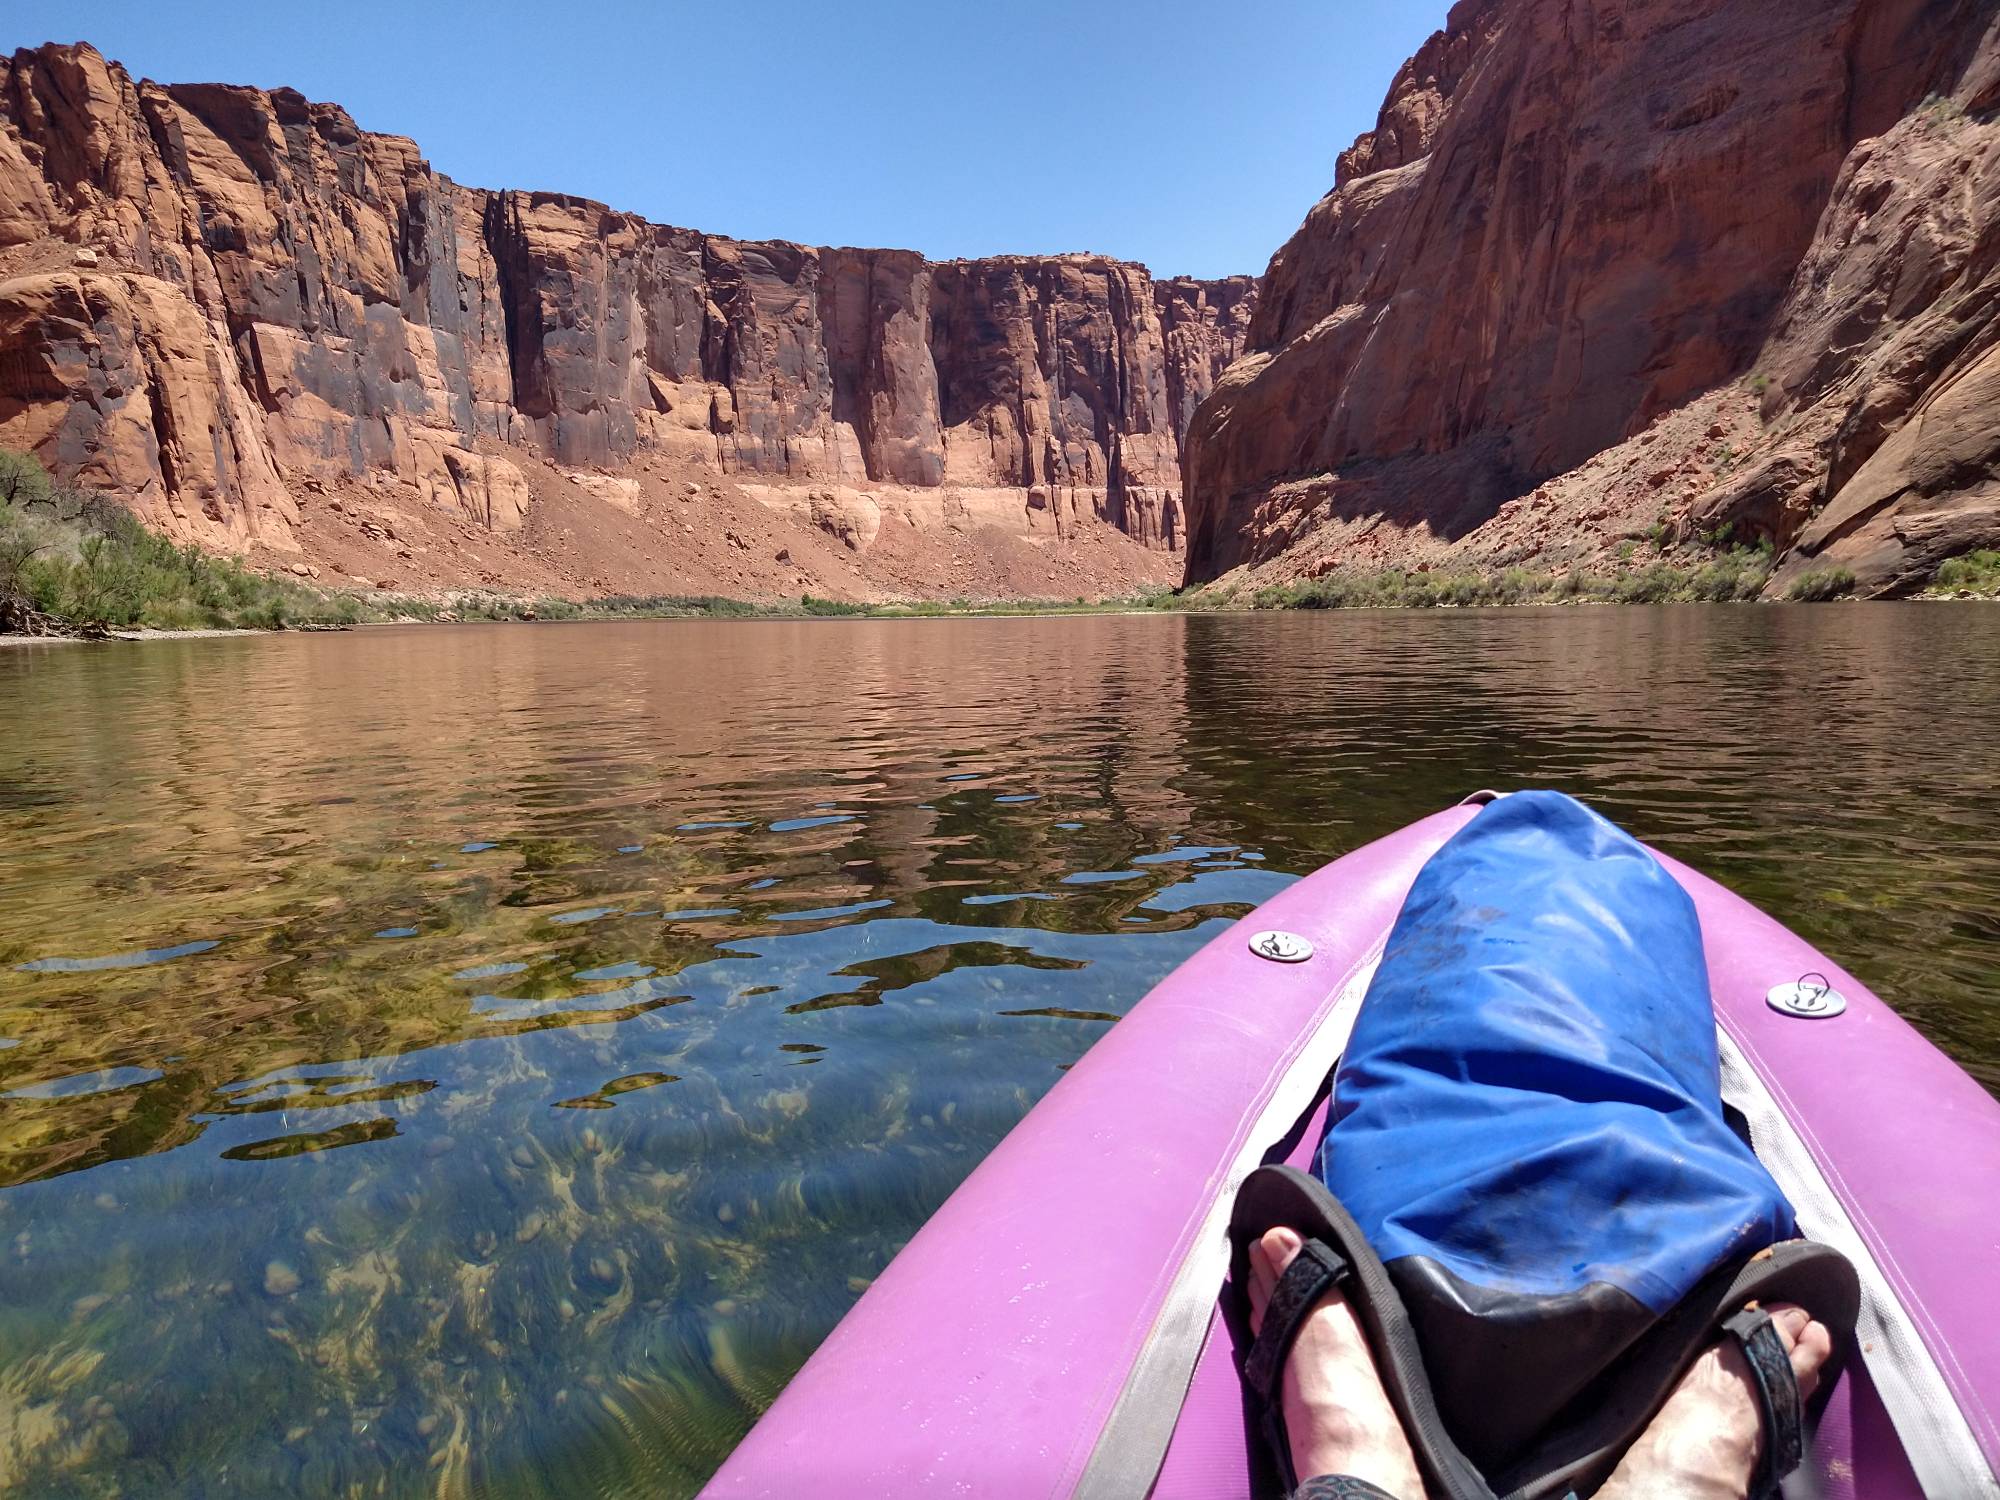 Kayaking in Glenn Canyon on the Colorado River